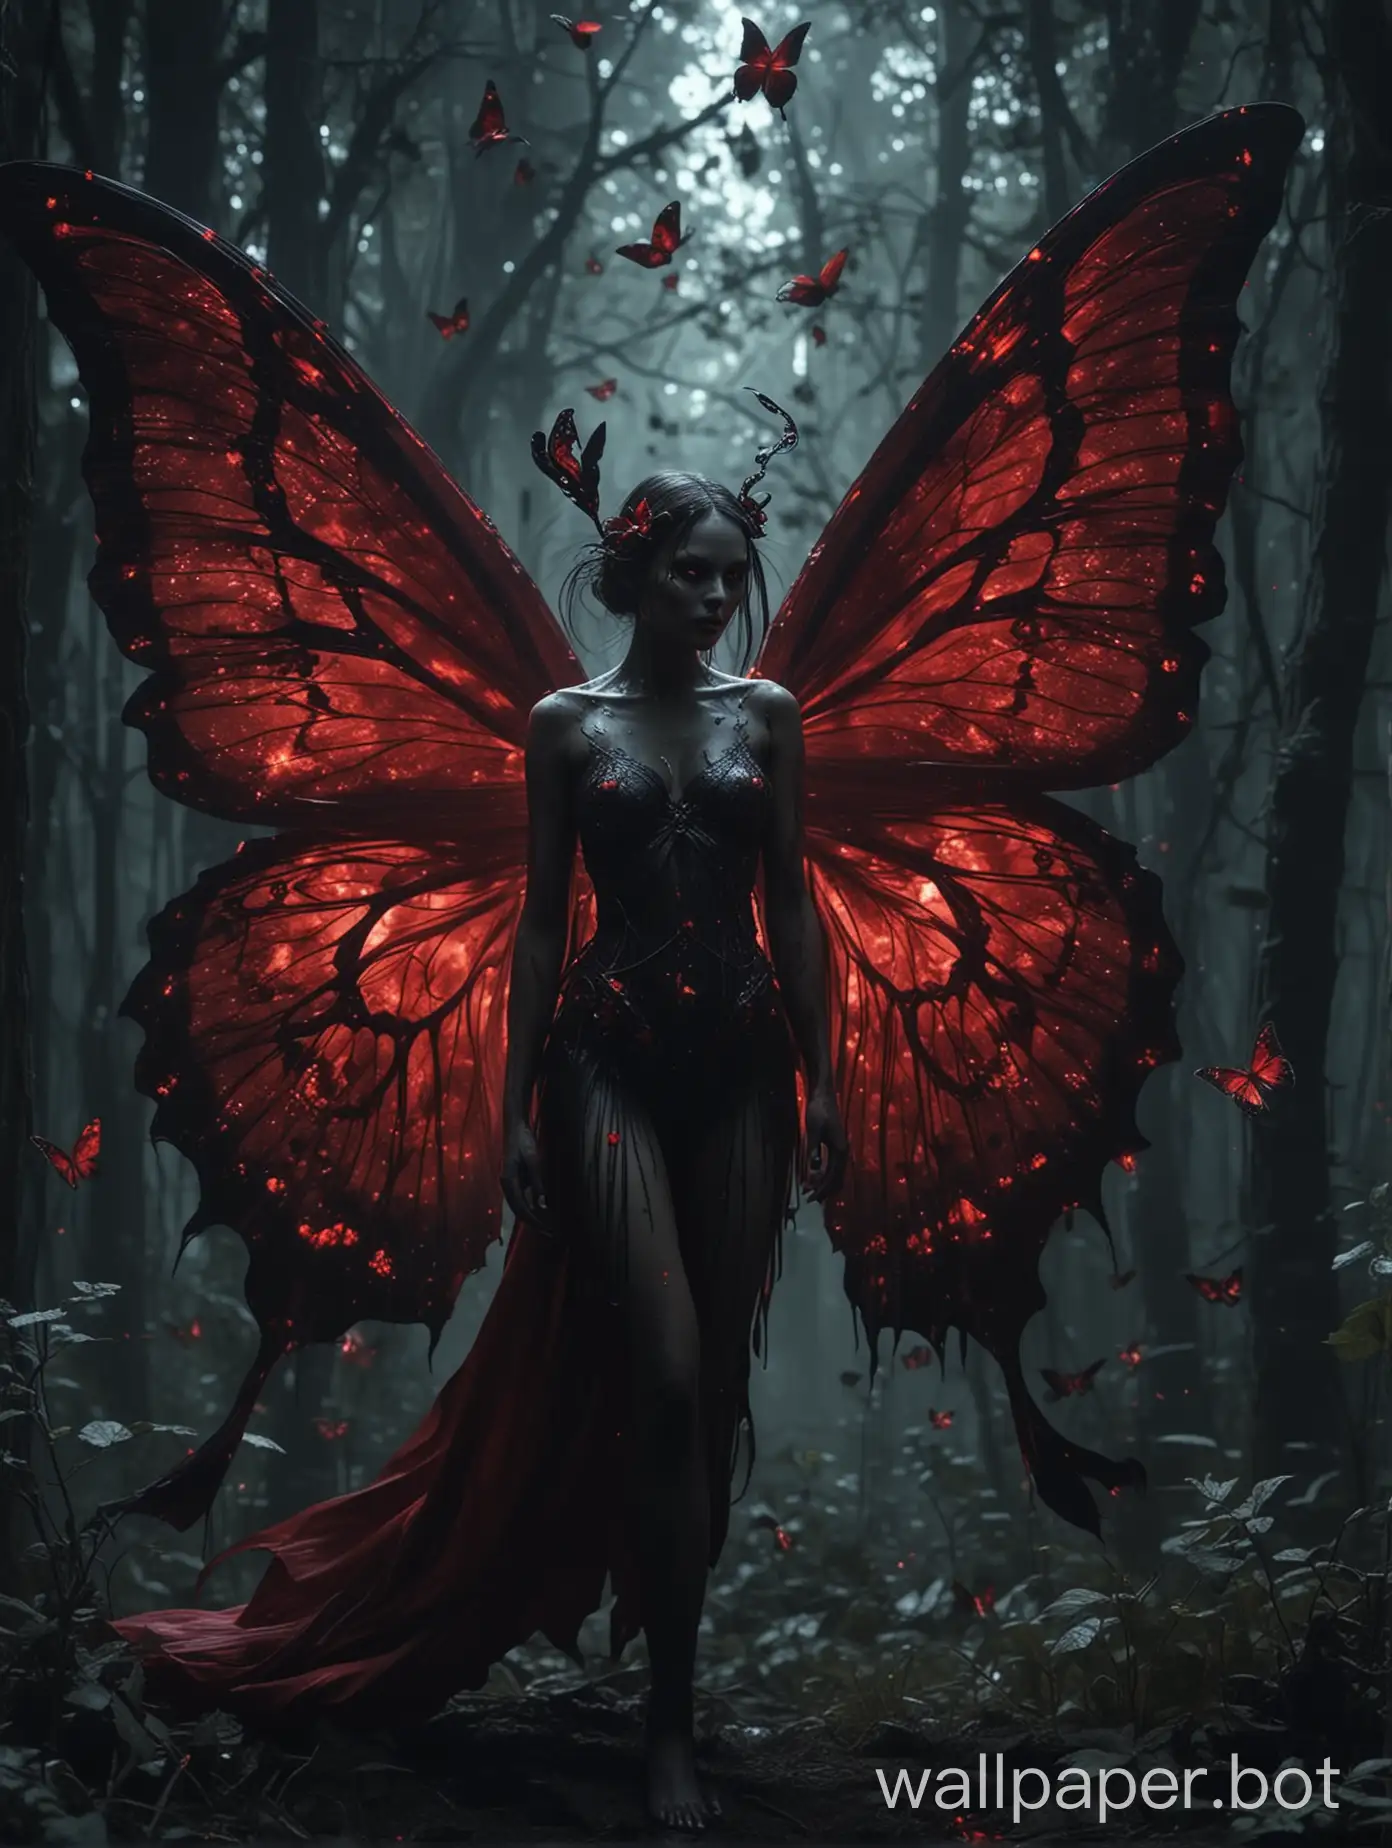 A surreal scene featuring a (((fantastical creature))) combining the elements of a butterfly and a fairy with the essence of a (((demonic figure))), colors of the natural world and the darkness of the supernatural red and black super pretty 4k